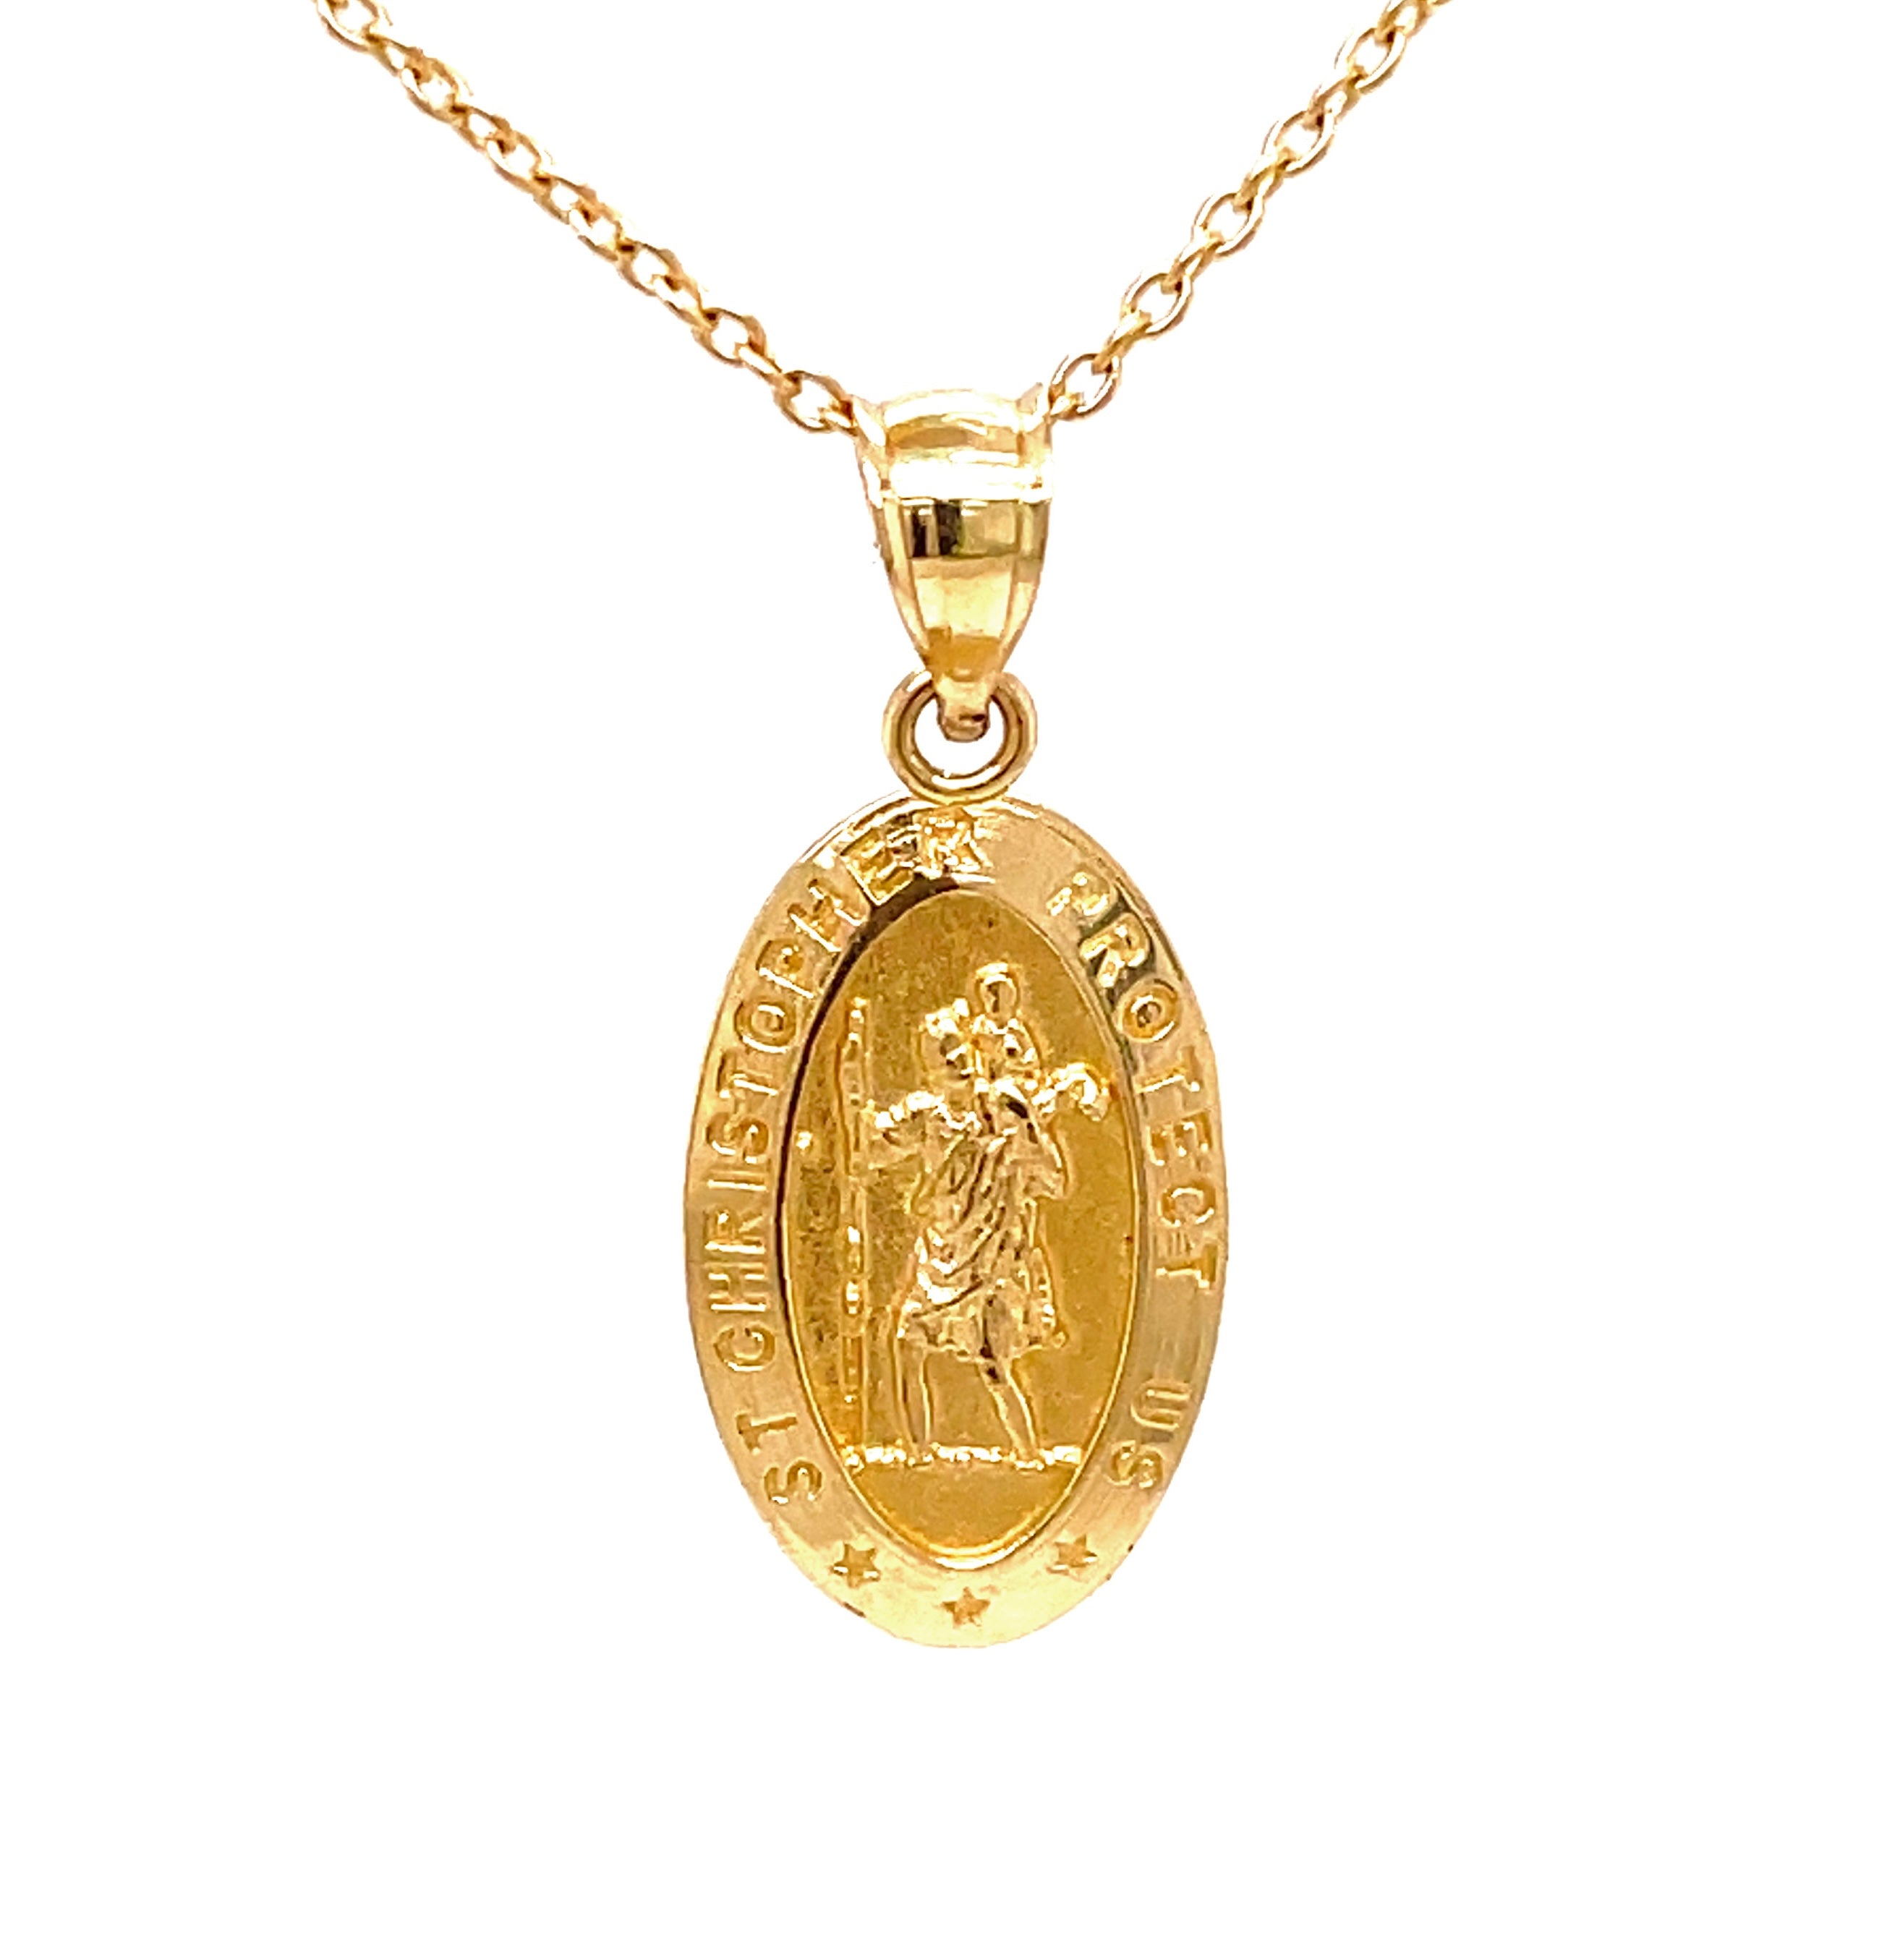 This gold Saint Christopher medal is crafted from 14k Italian yellow gold, with a secure bail and gallery finish at the back for lasting quality and style. A classic 18" Italian chain is optional for $199.